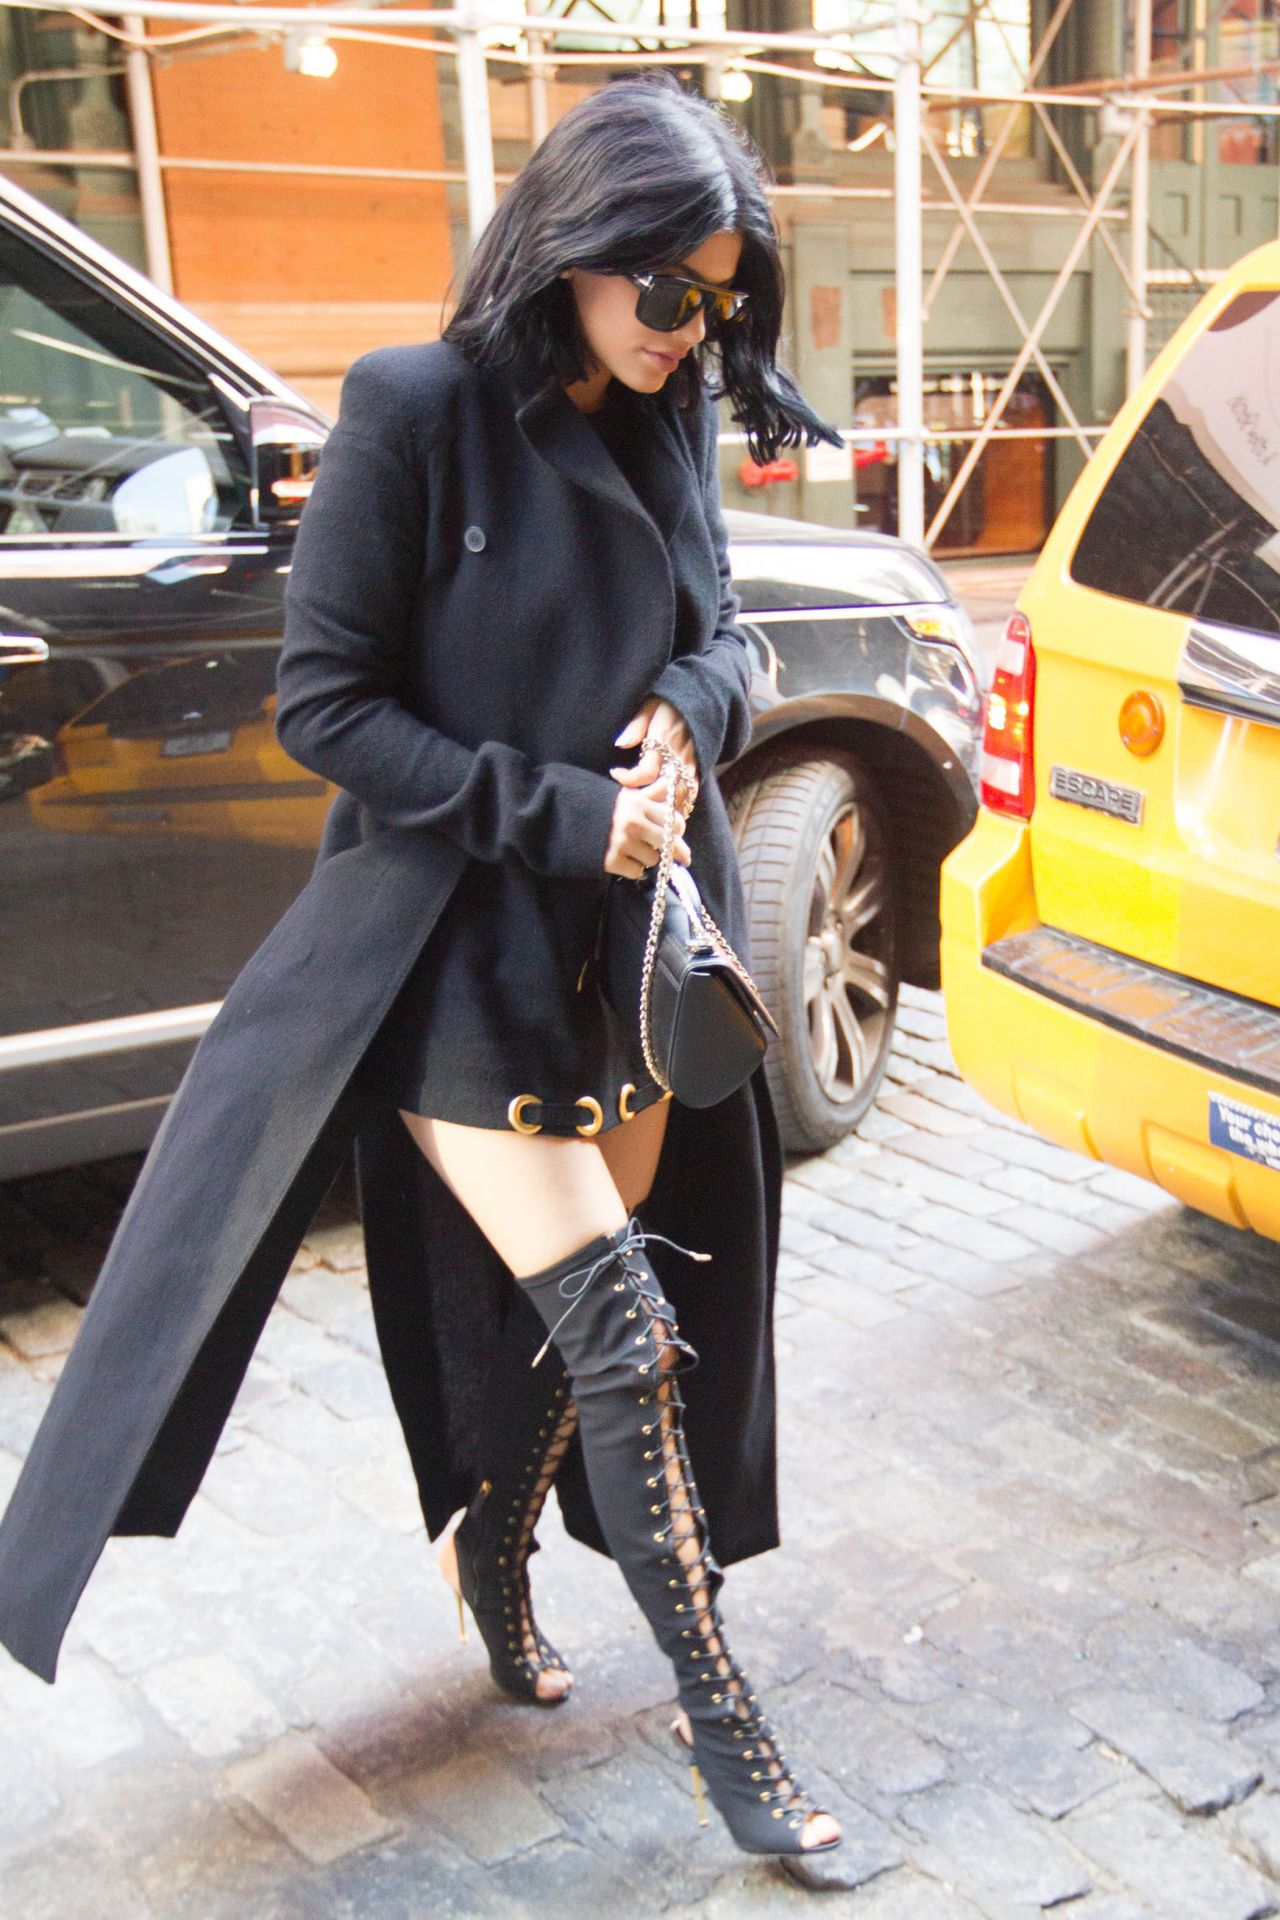 kylie-jenner-style-out-and-about-in-soho-nyc-october-2015_17